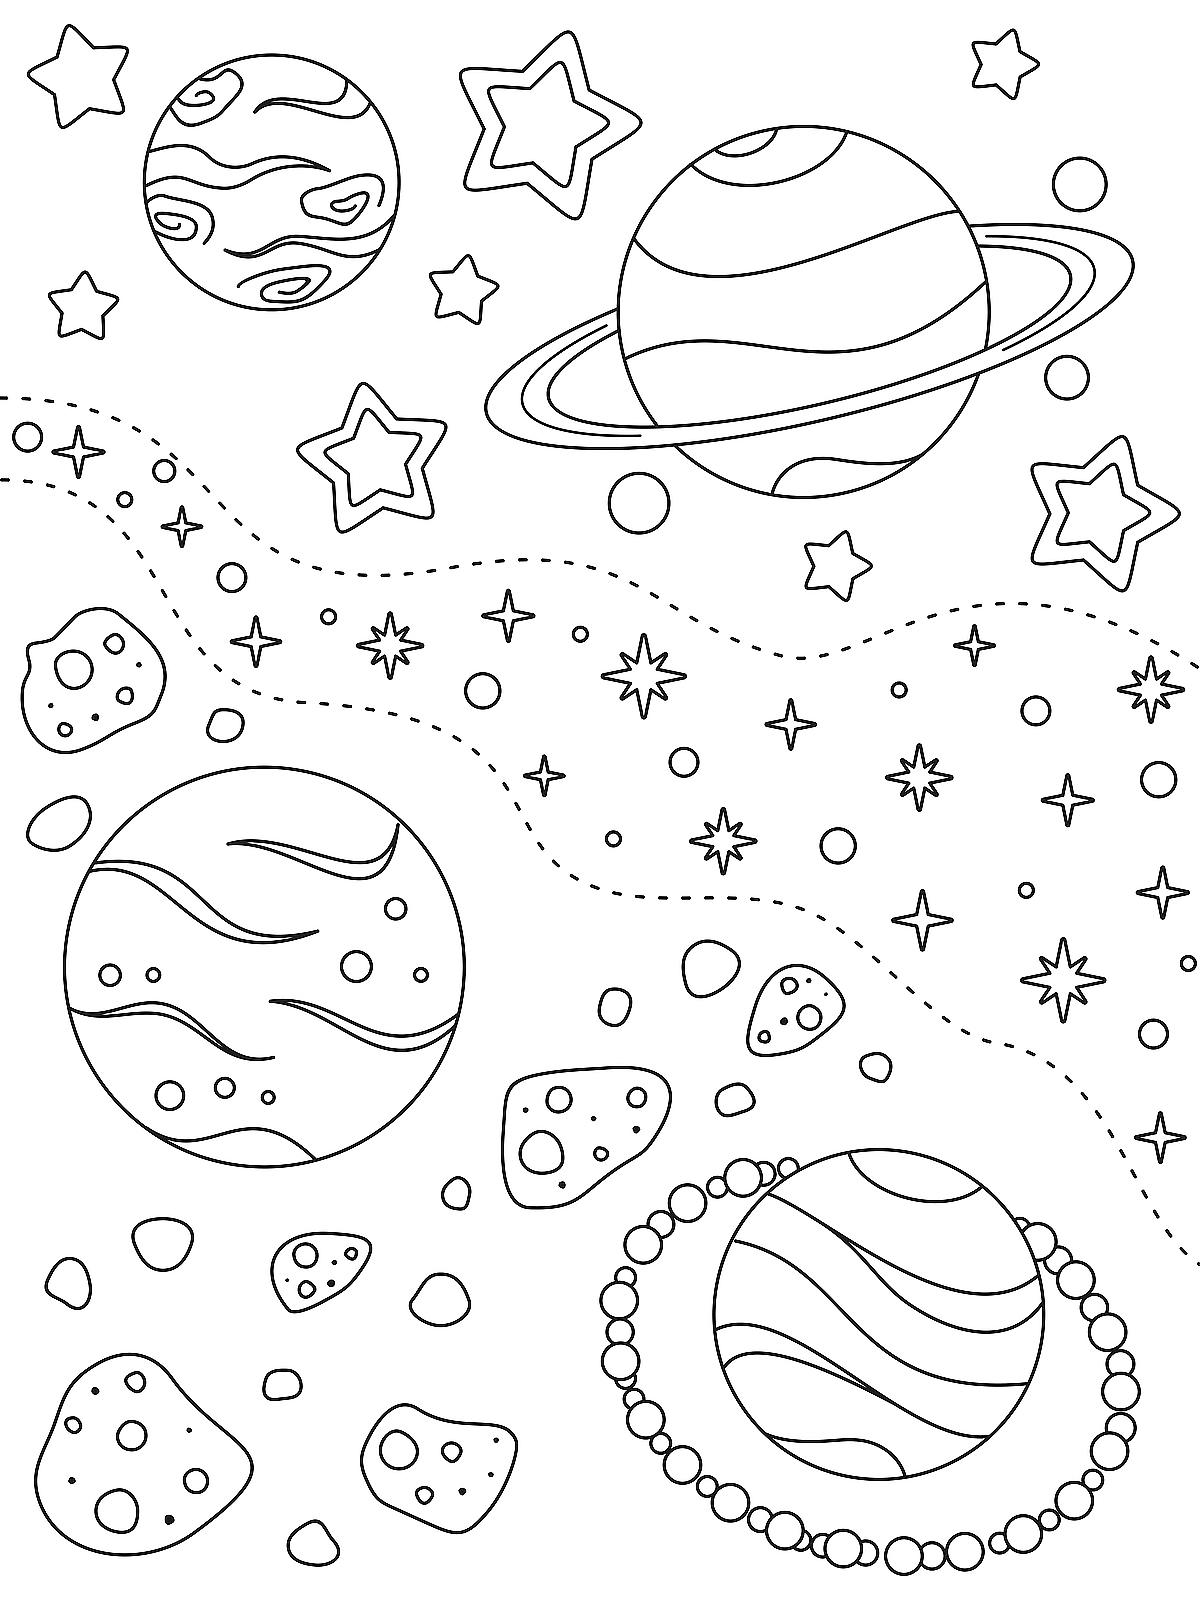 Outer Space Coloring Page For Kids Fun Free Printable Coloring Page 